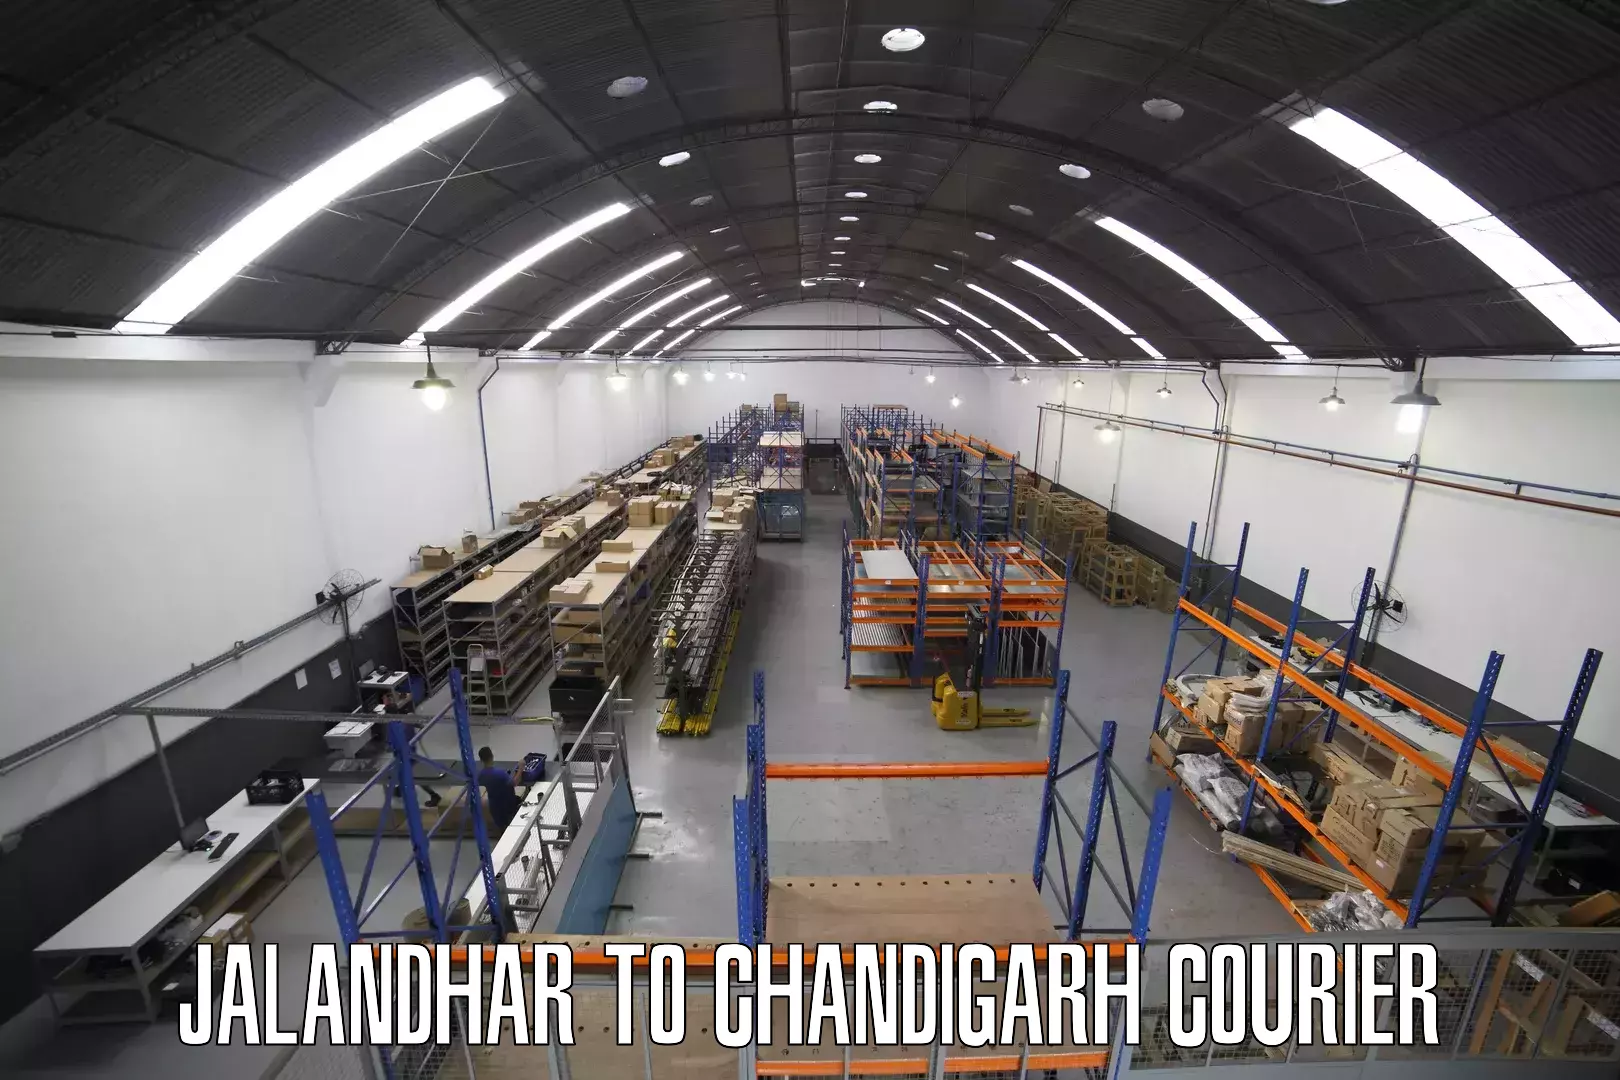 Quality courier partnerships Jalandhar to Chandigarh